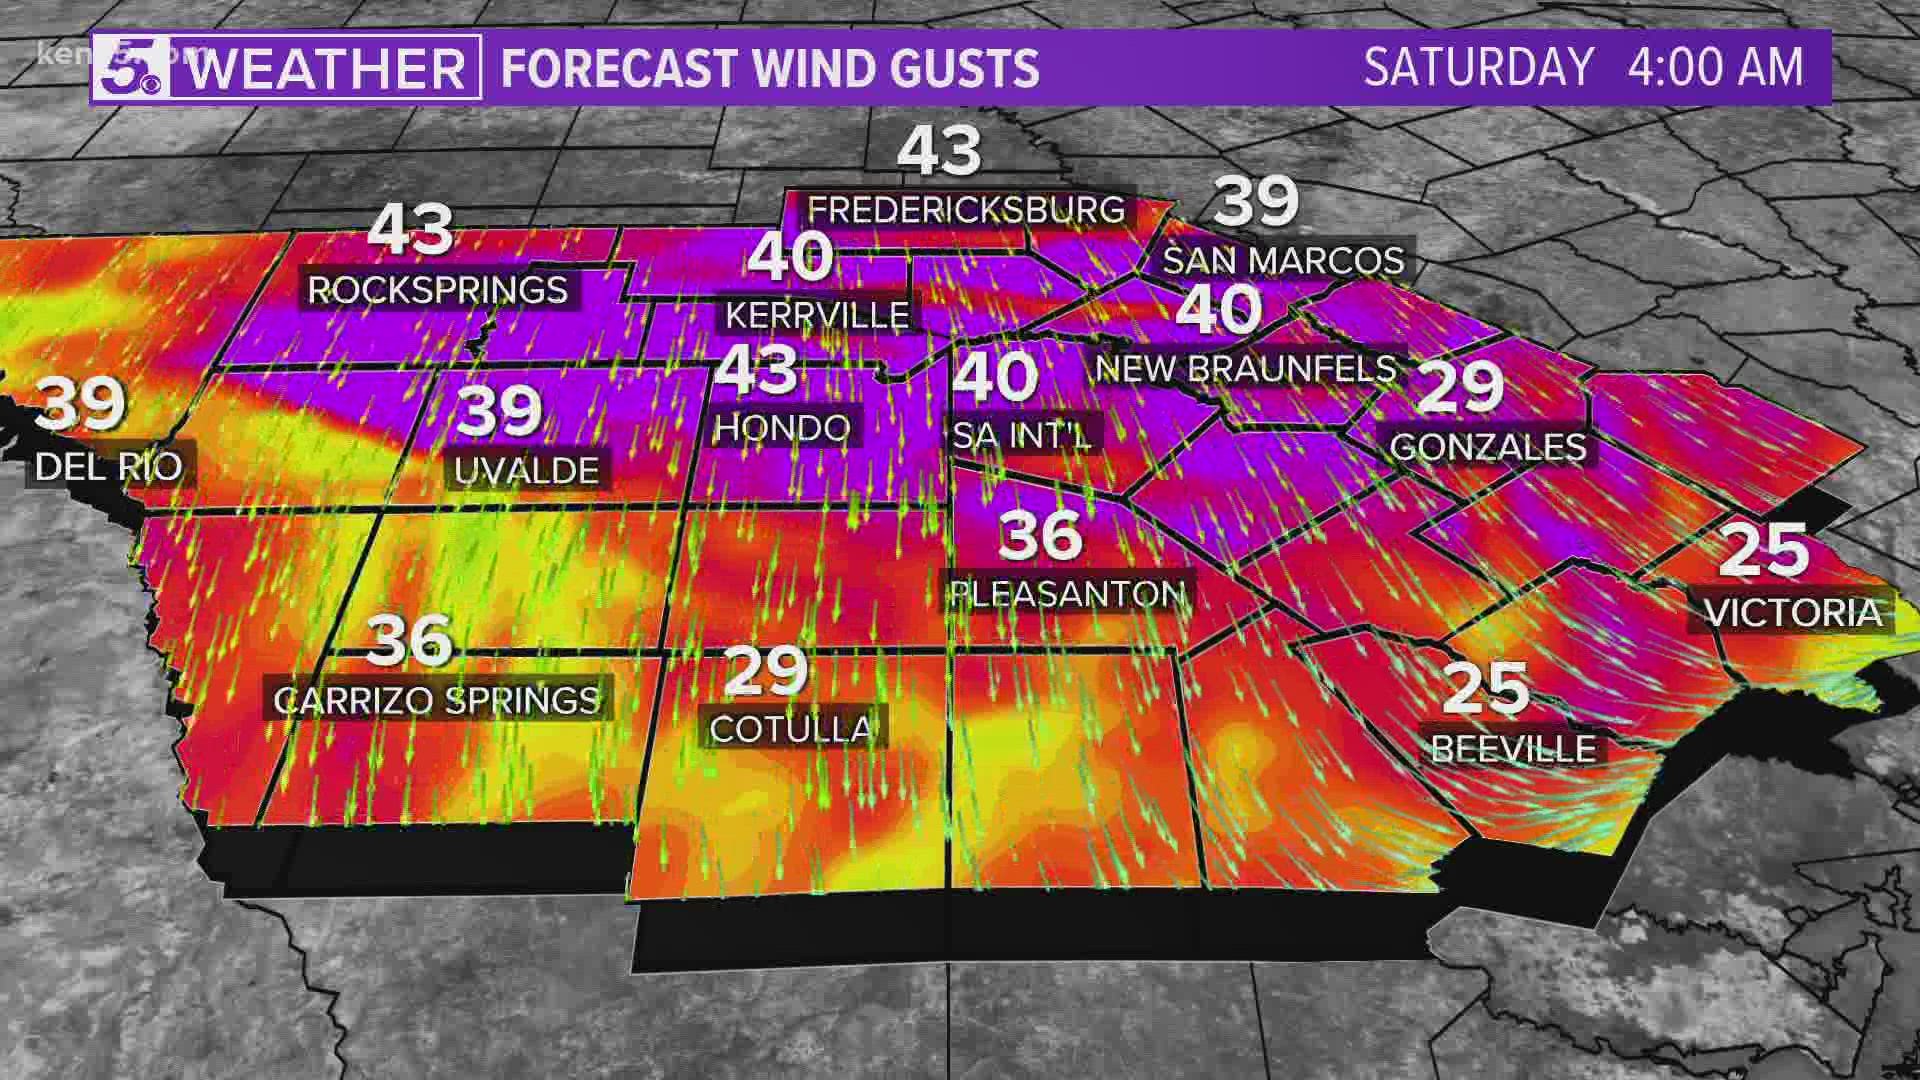 Wind gusts will become dangerous Saturday afternoon around 4 p.m.